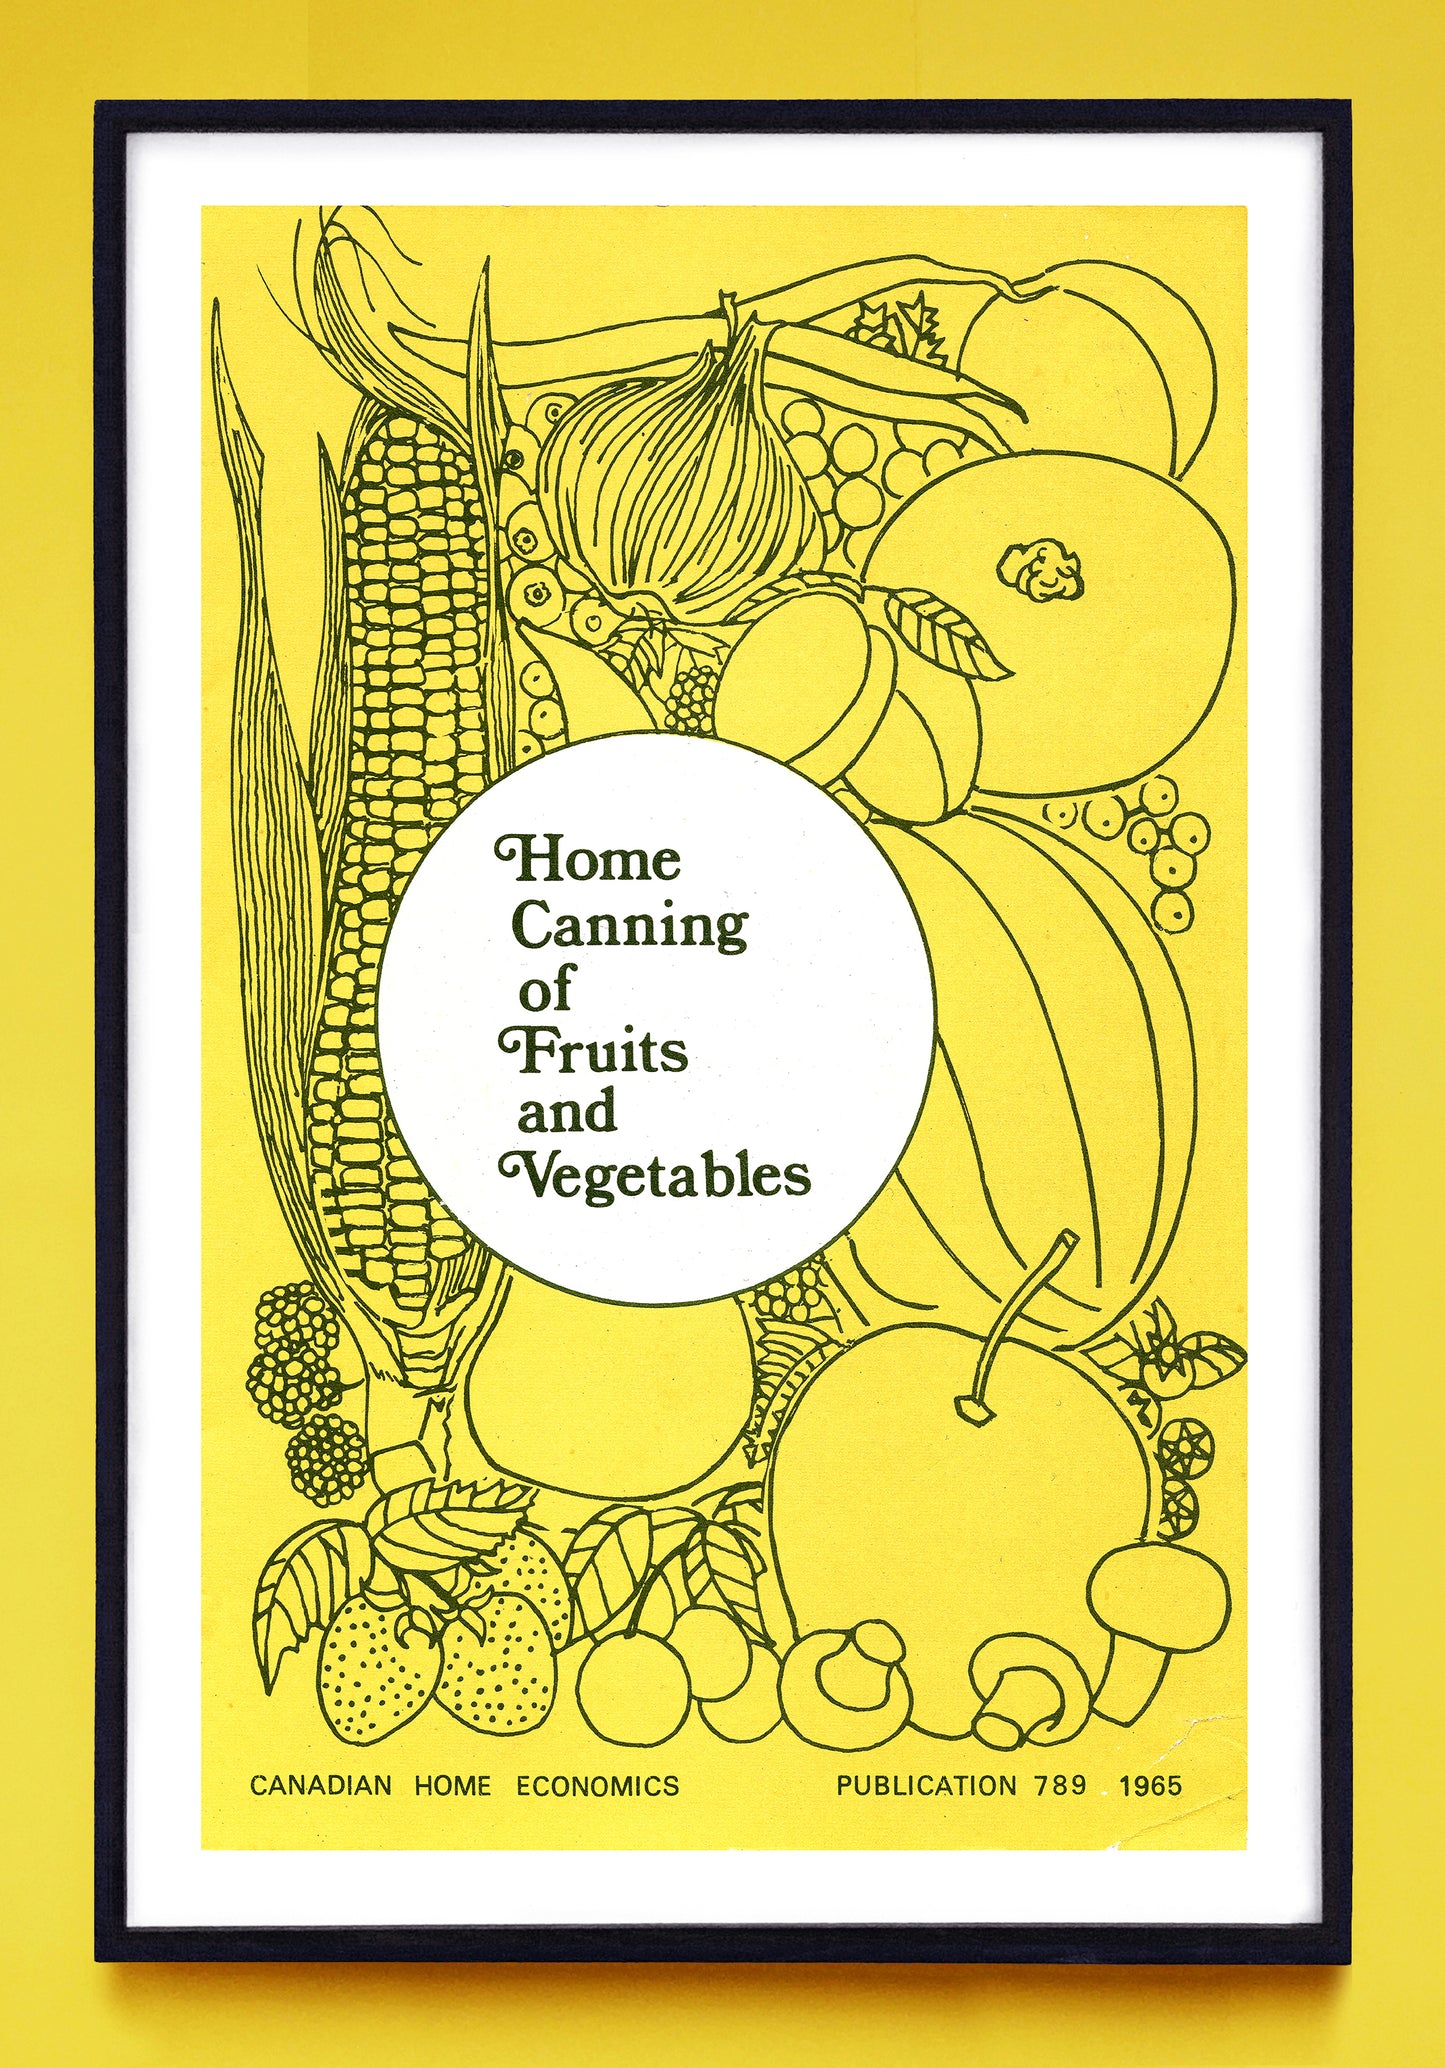 "Home Canning of Fruits and Vegetables" print